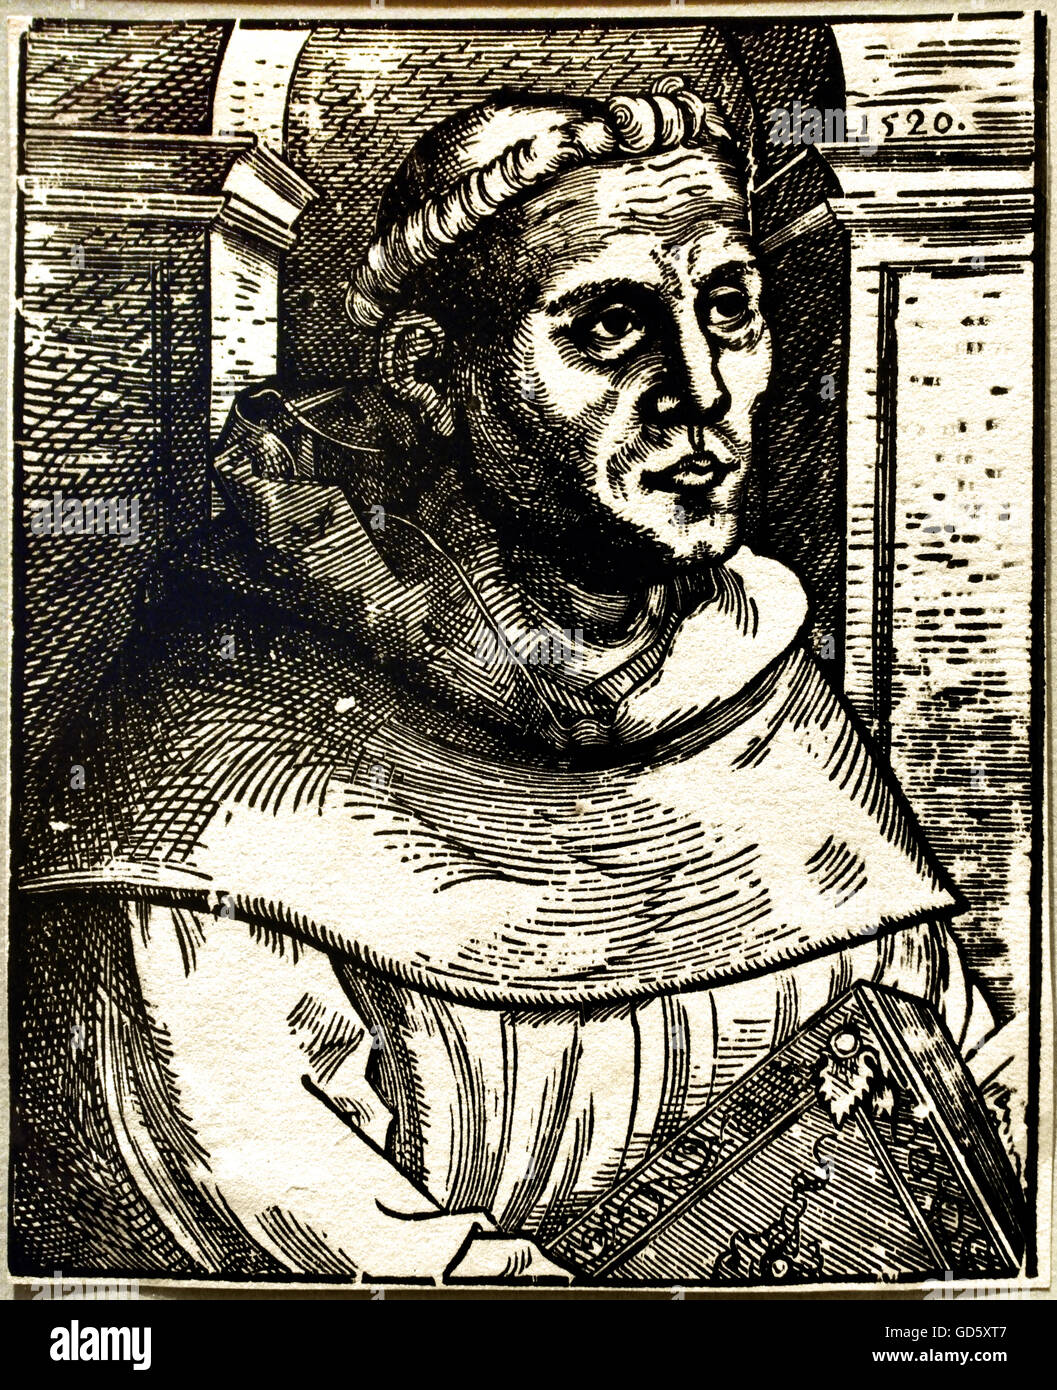 Martin Luther as an Augustinian monk Lucas Cranach the Elder 1472-1553 Wittenberg 1520 ( Martin Luther 1483 – 1546 Protestant ) Woodcut  Germany ( German professor of theology and a key figure in the Protestant Reformation ) Stock Photo